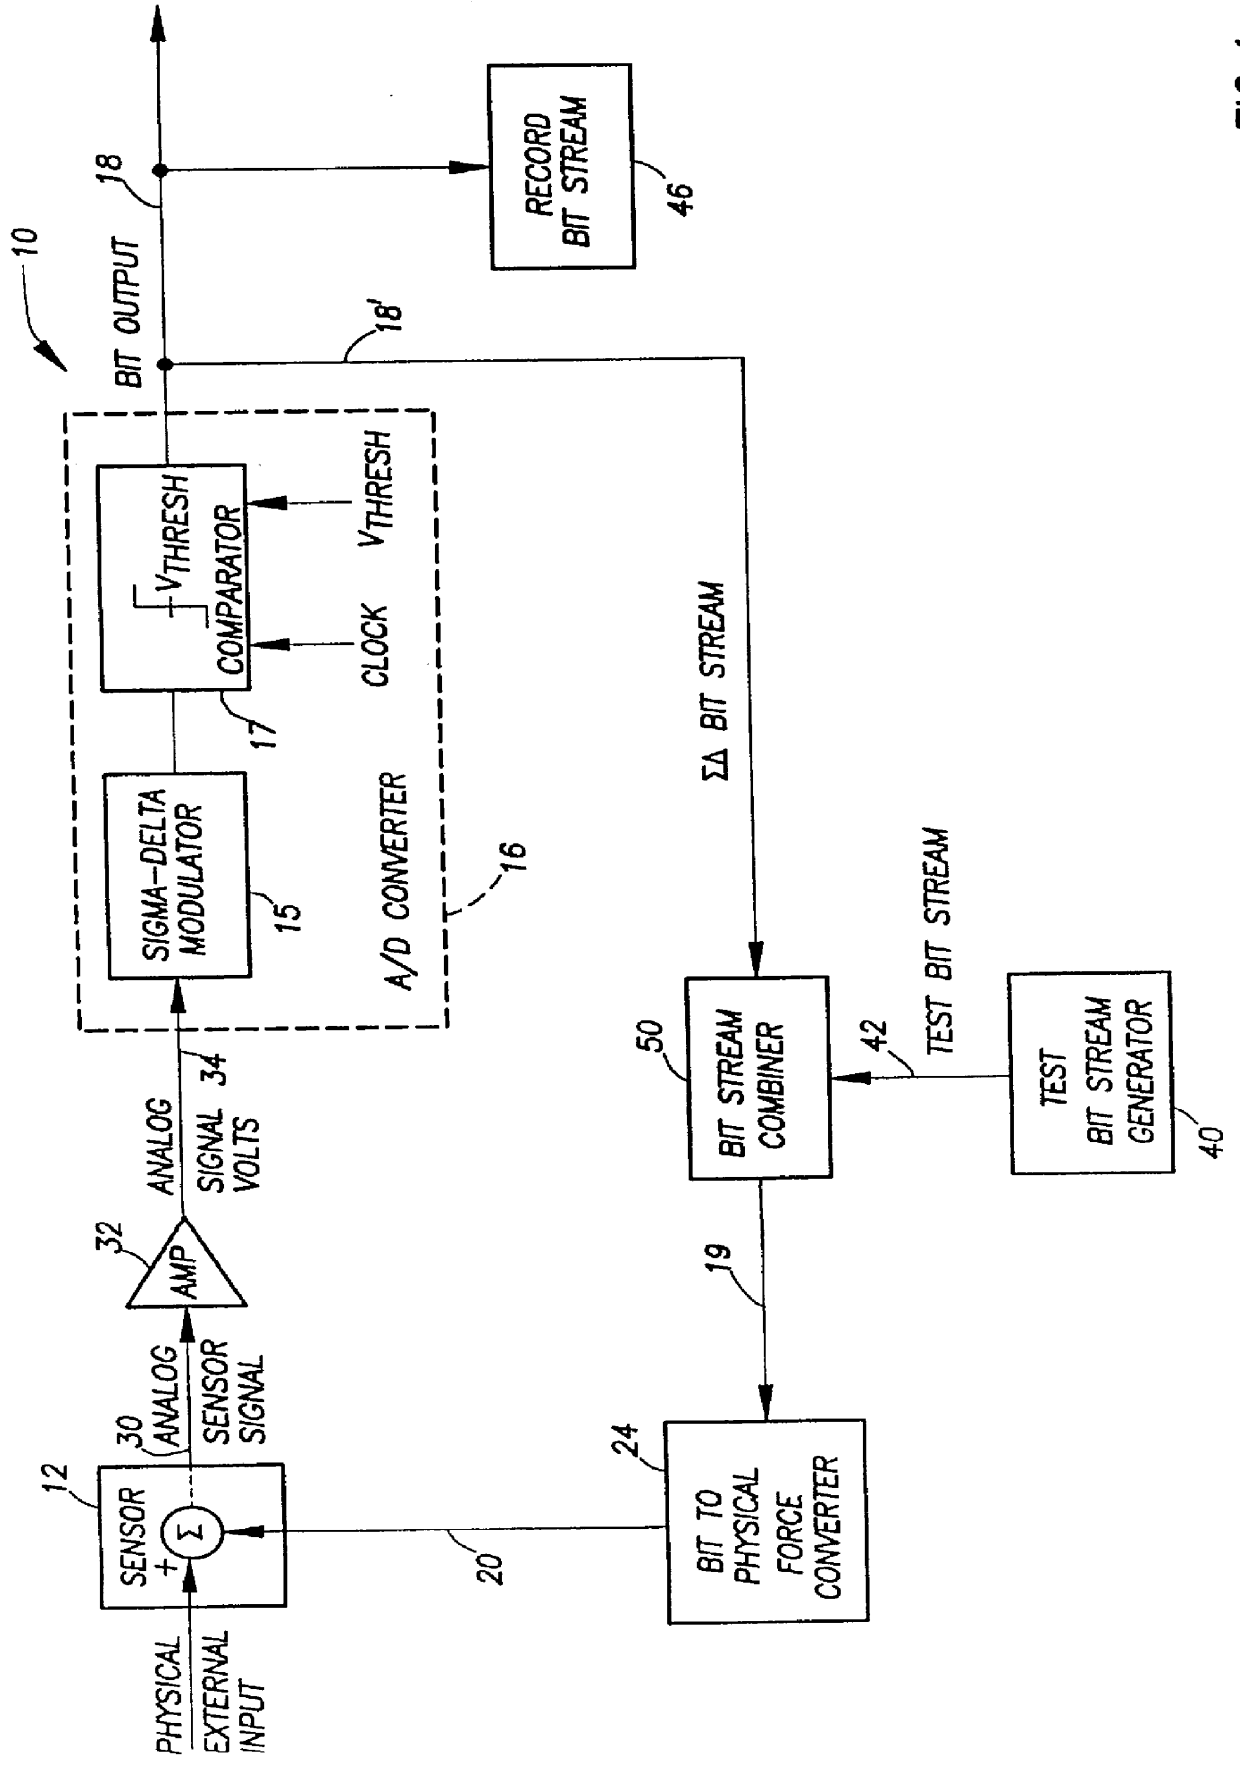 Method and apparatus for generation of test bitstreams and testing of close loop transducers